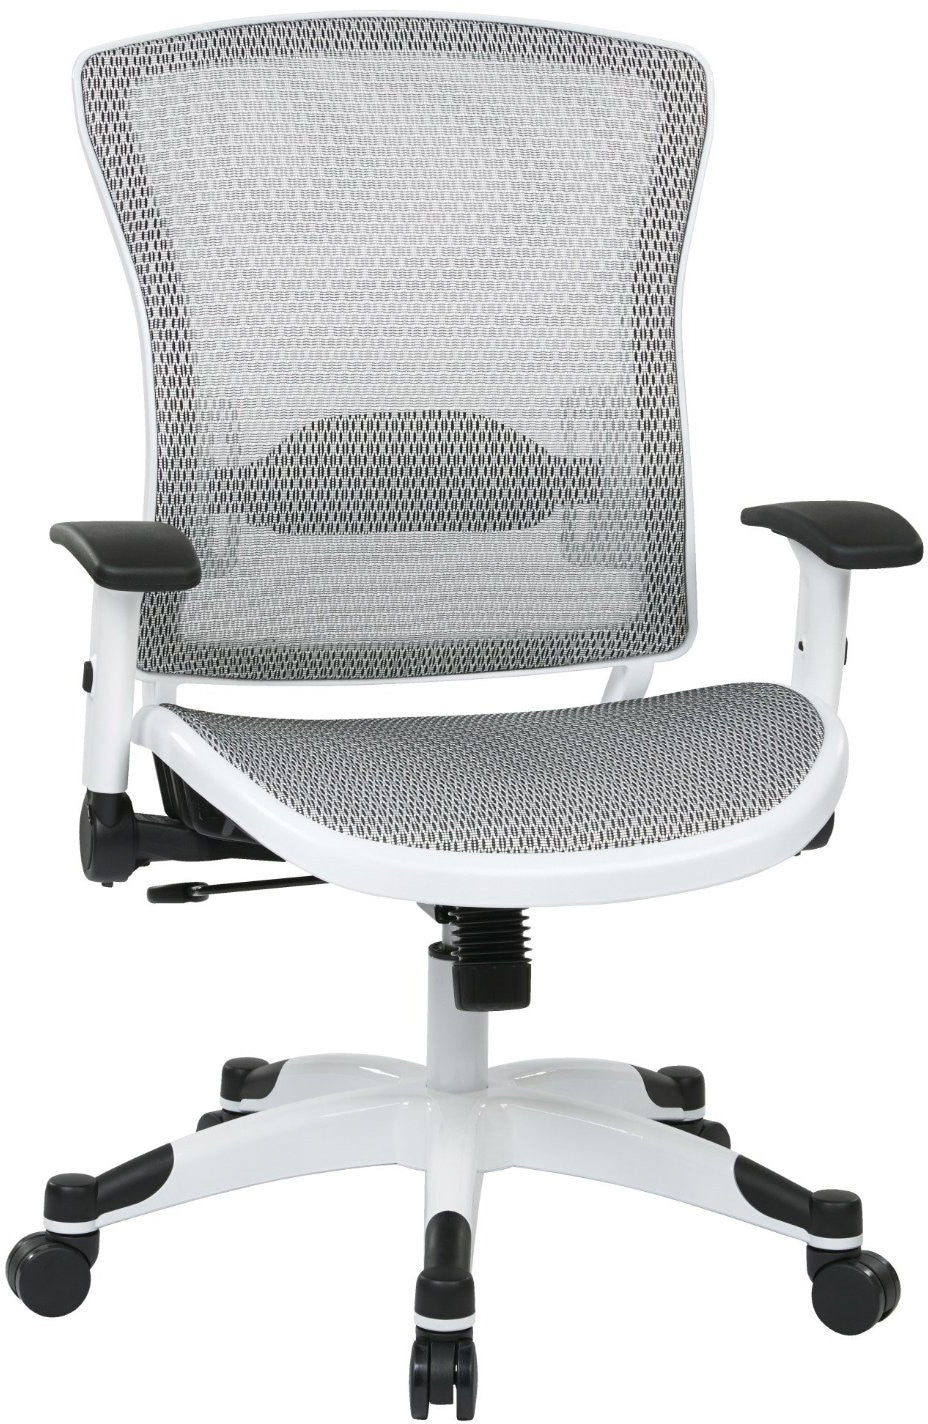 Space Seating 317w-w11c1f2w White Frame Managers Chair With Padded Mesh Seat And Back, Height Adjustable Flip Arms And Coated Nylon Base (white)